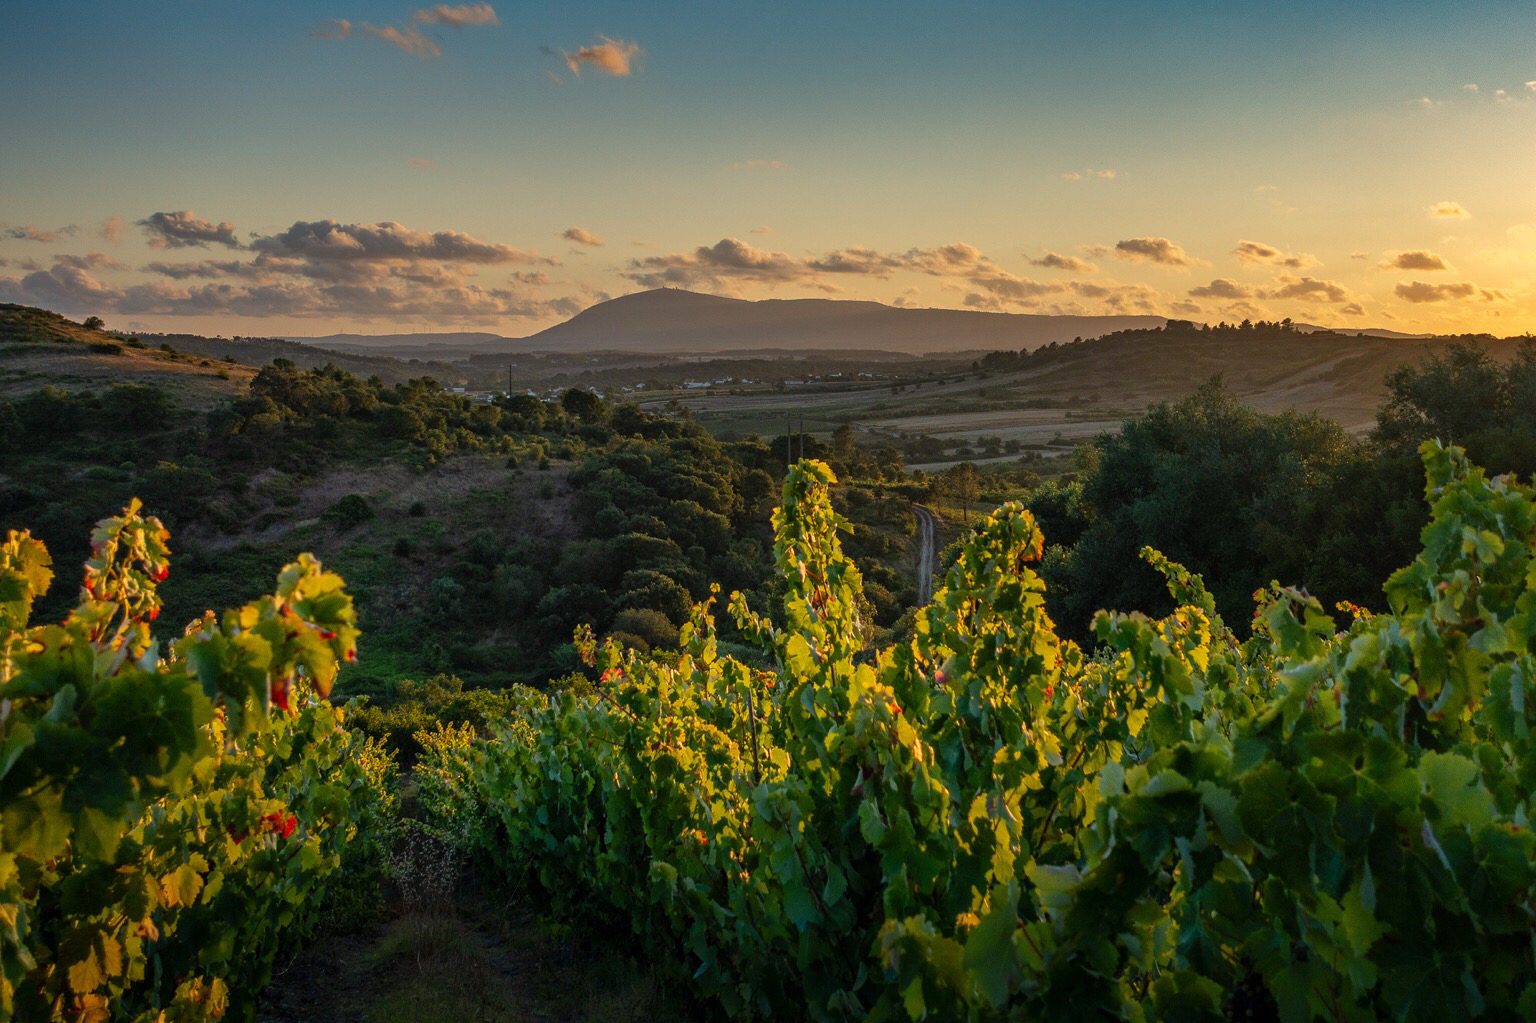 Looking out towards Montejunto from a hillside vineyard as the last rays of the sun hit the vines